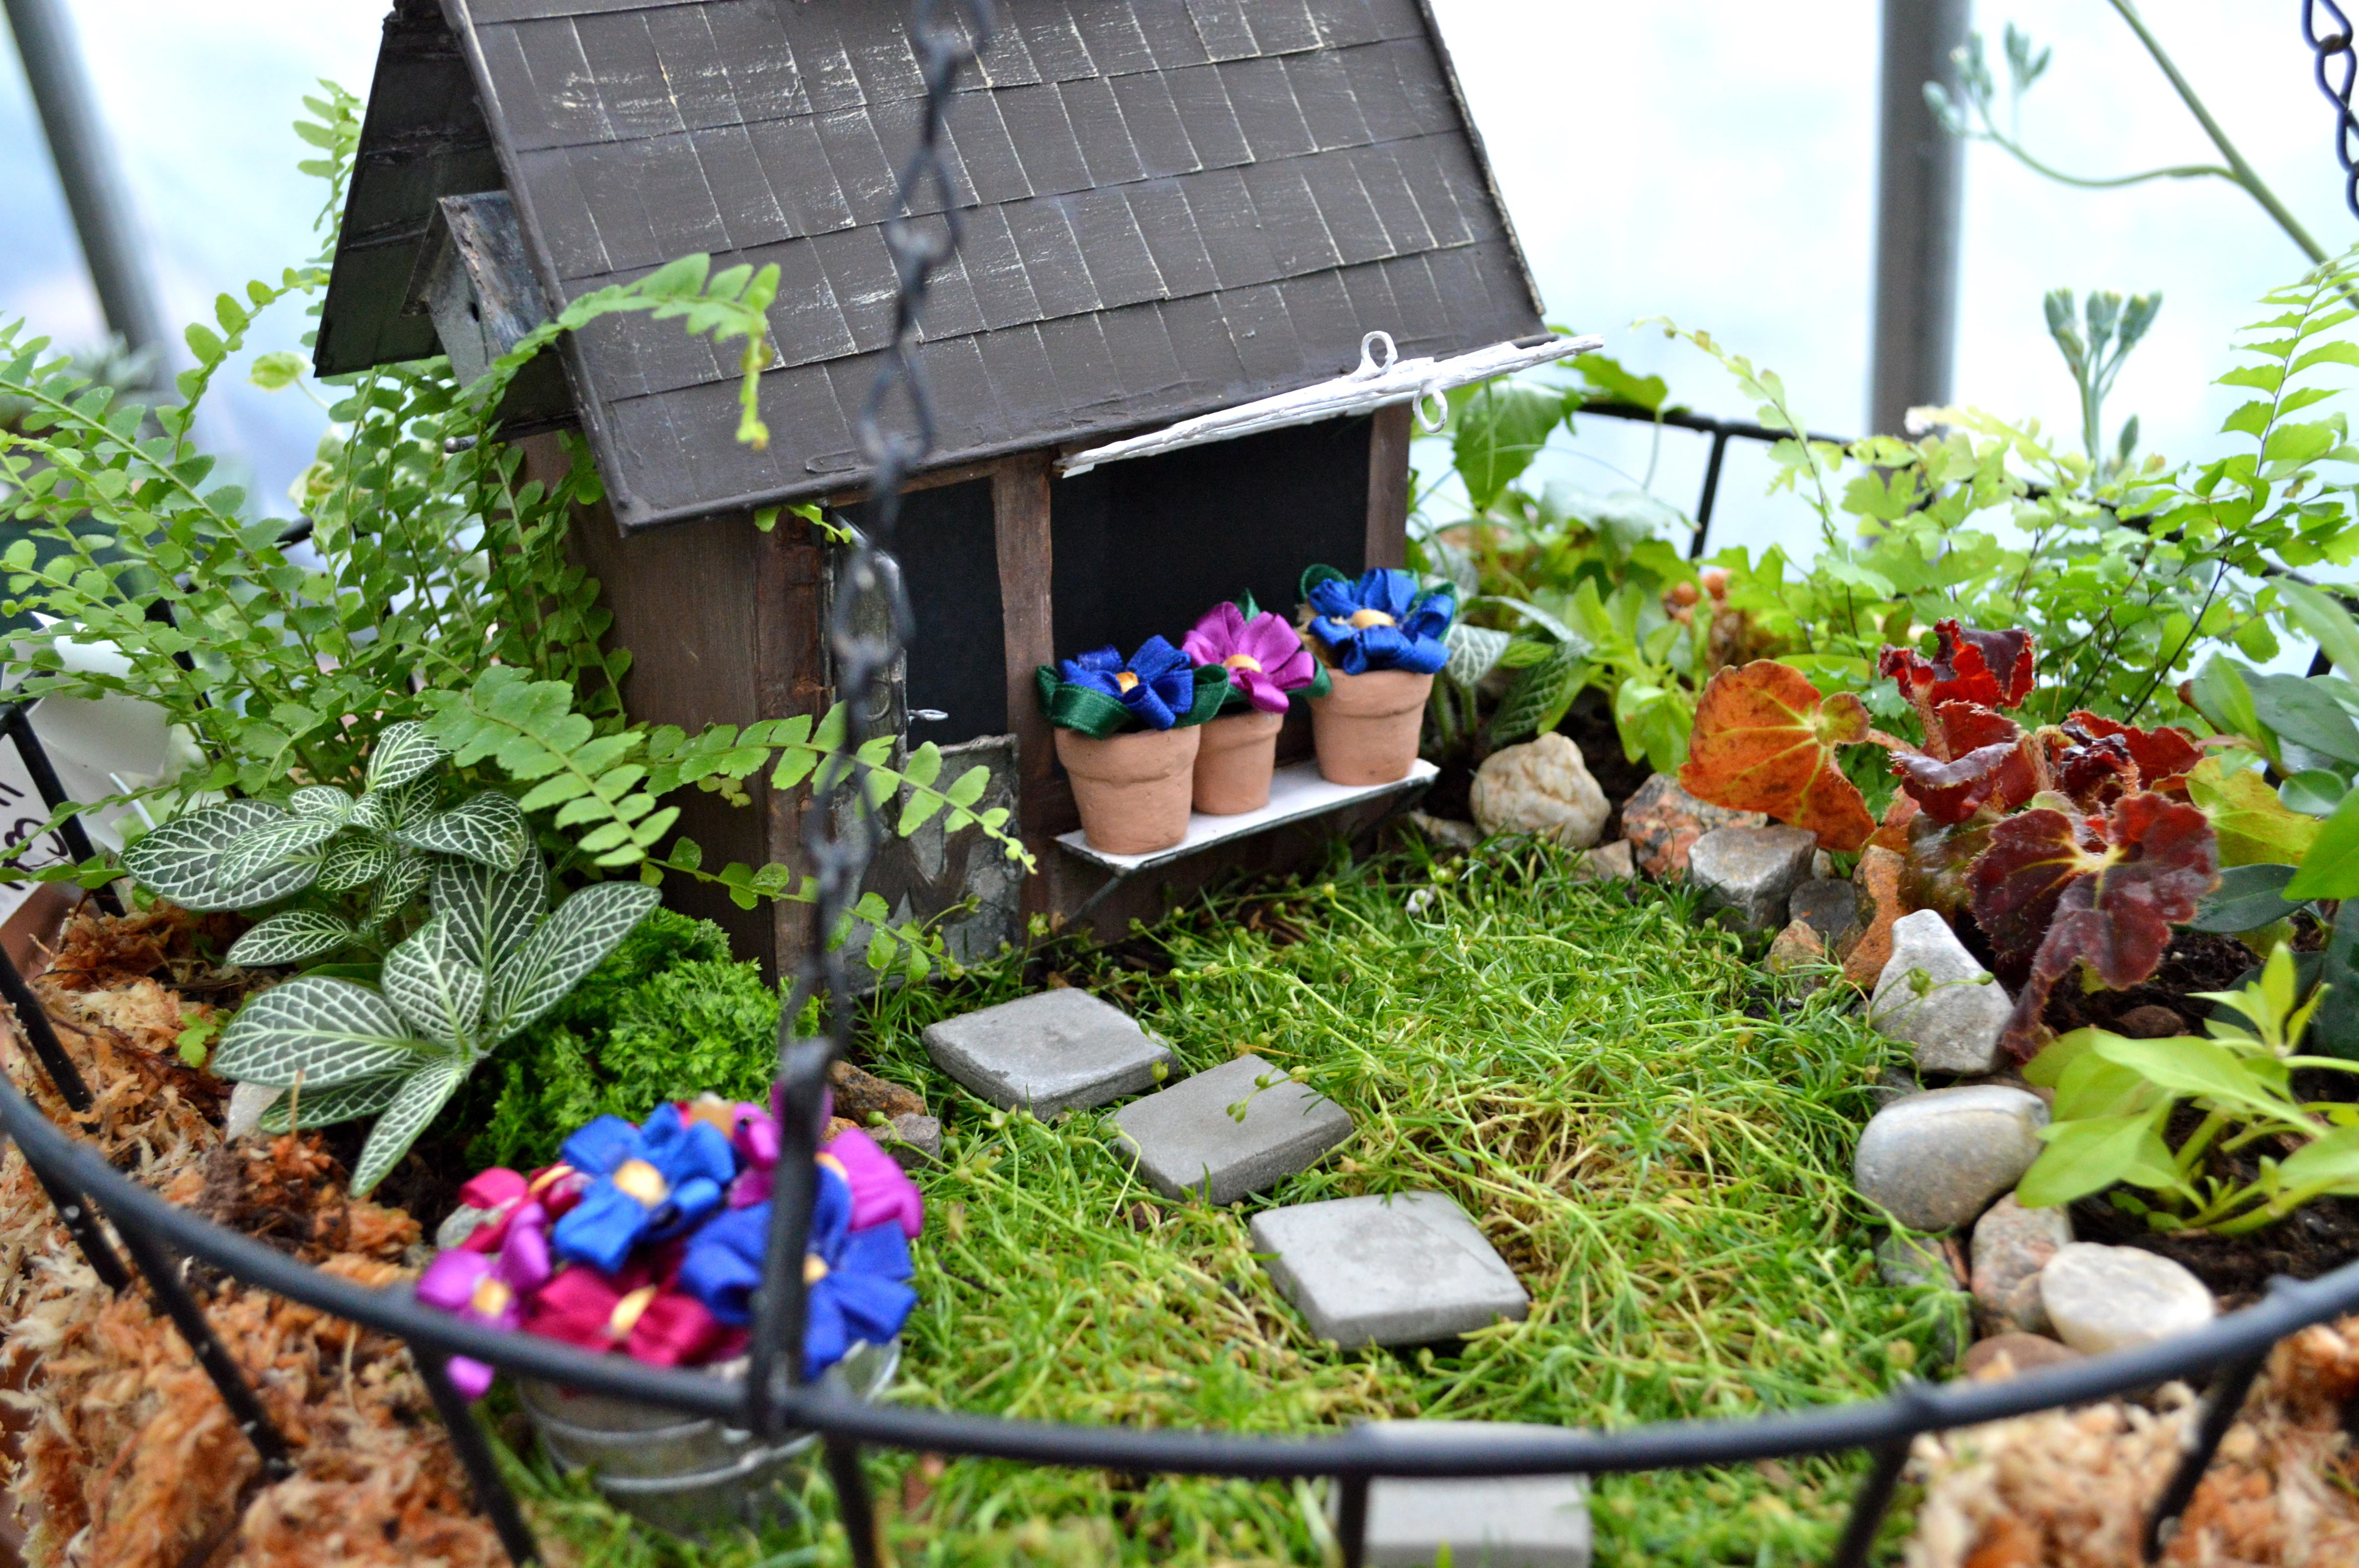 diy fairy house, little wooden house decoration, inside a tiny garden, with small plants, grass and small tiles, model pots with artificial flowers